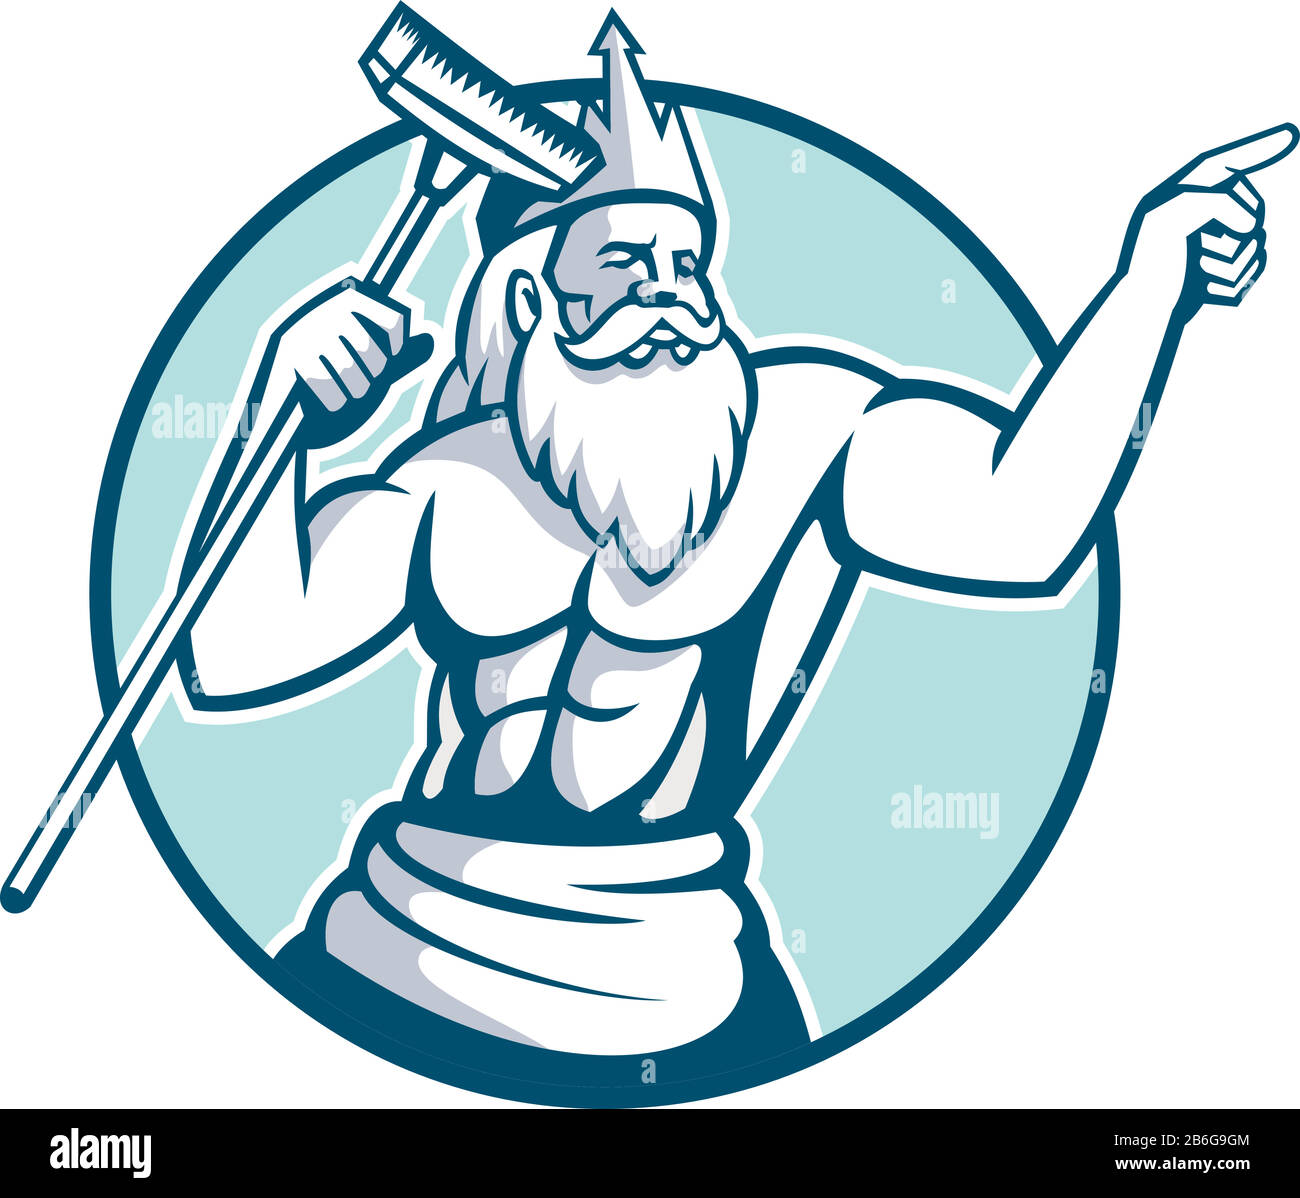 Mascot icon illustration of Neptune, god of the sea in Roman mythology or Poseidon in Greek, holding a pool scrub or brush cleaner pointing set inside Stock Vector